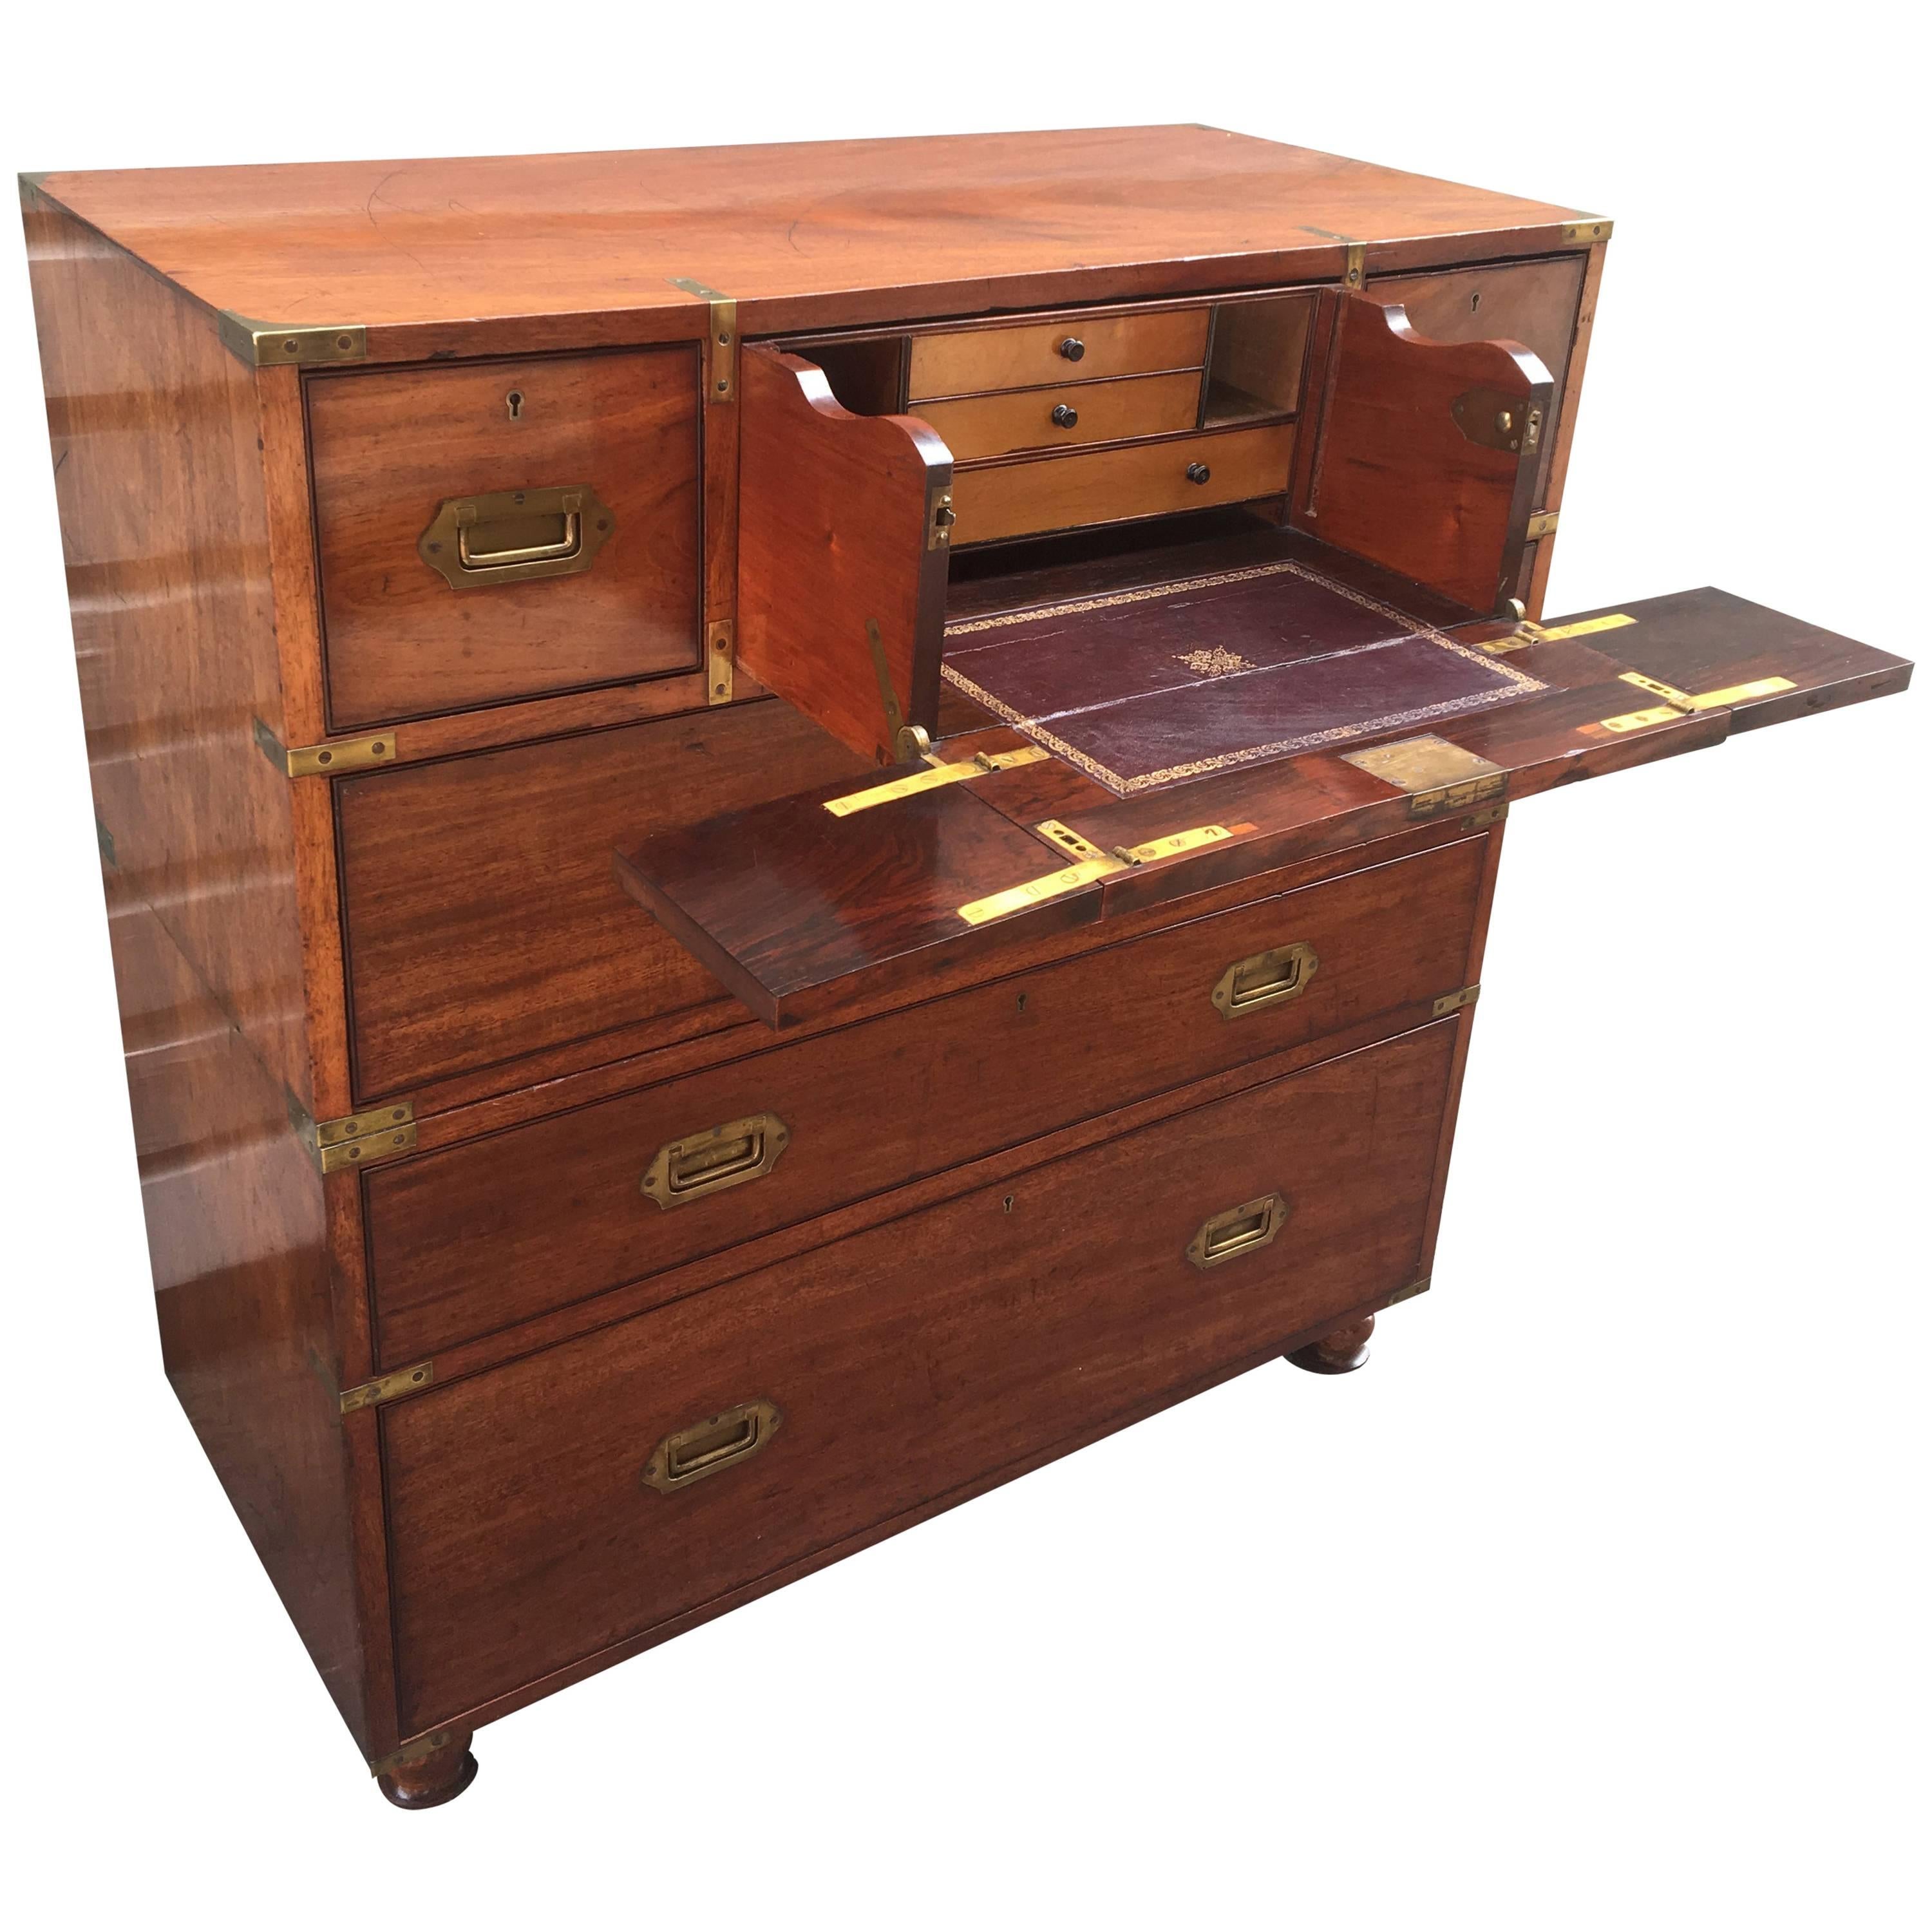 This mid-19th century brass-mounted mahogany two-part Campaign chest has a removable mahogany panel covering the satinwood. Fitted interior of the secrétaire drawer with usual folding sides. Beautiful screw on removable feet. Rare candlestick